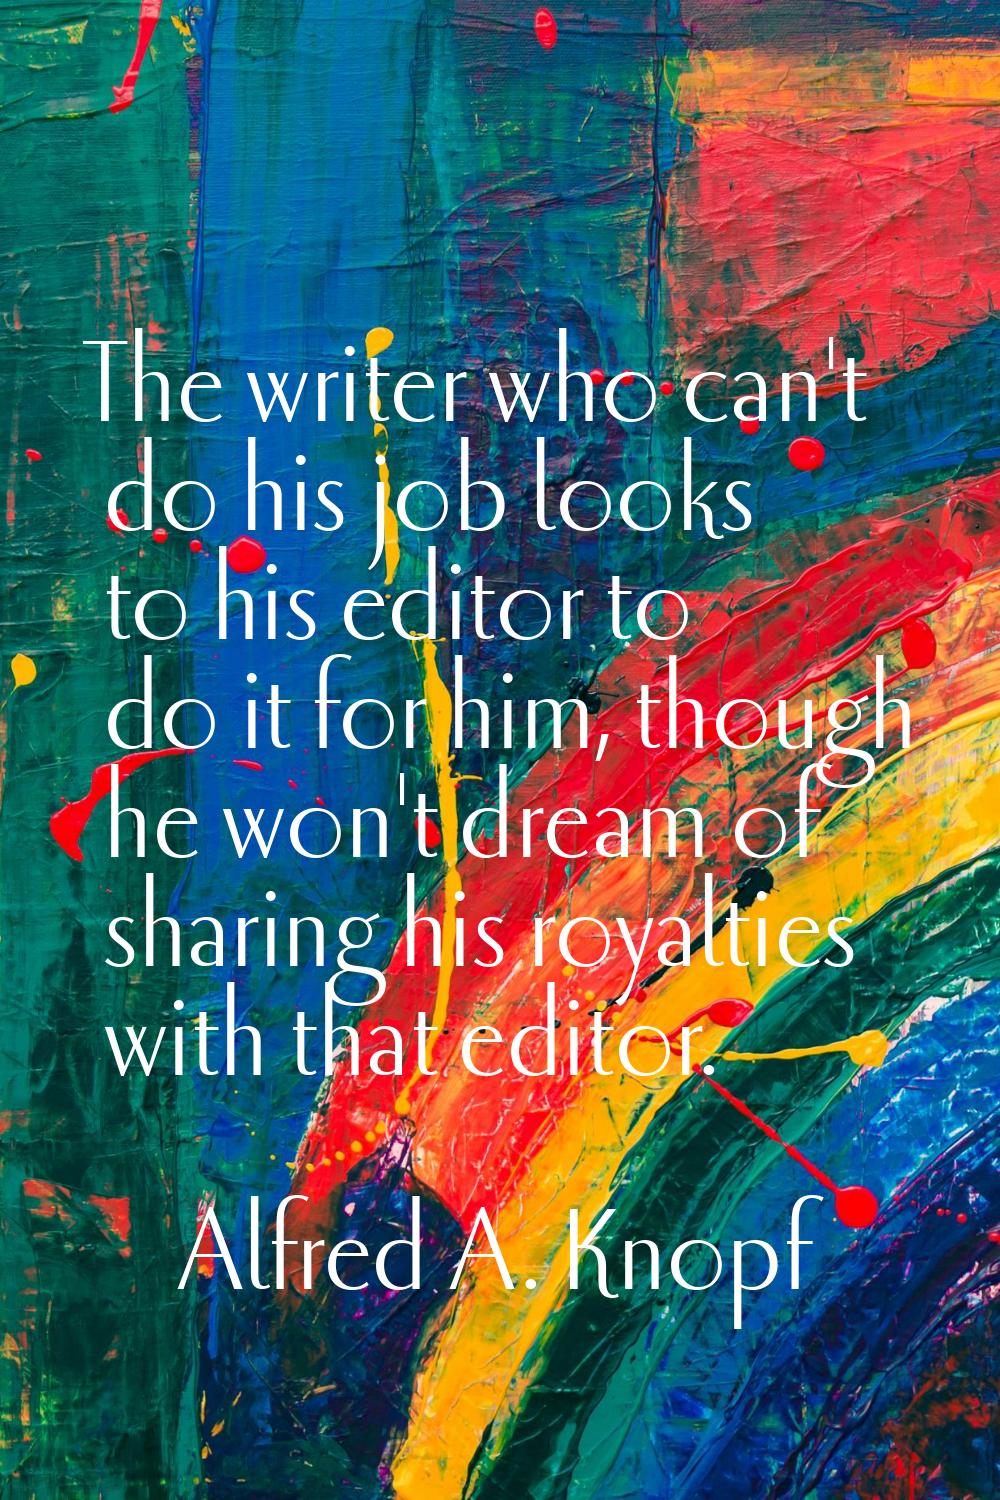 The writer who can't do his job looks to his editor to do it for him, though he won't dream of shar